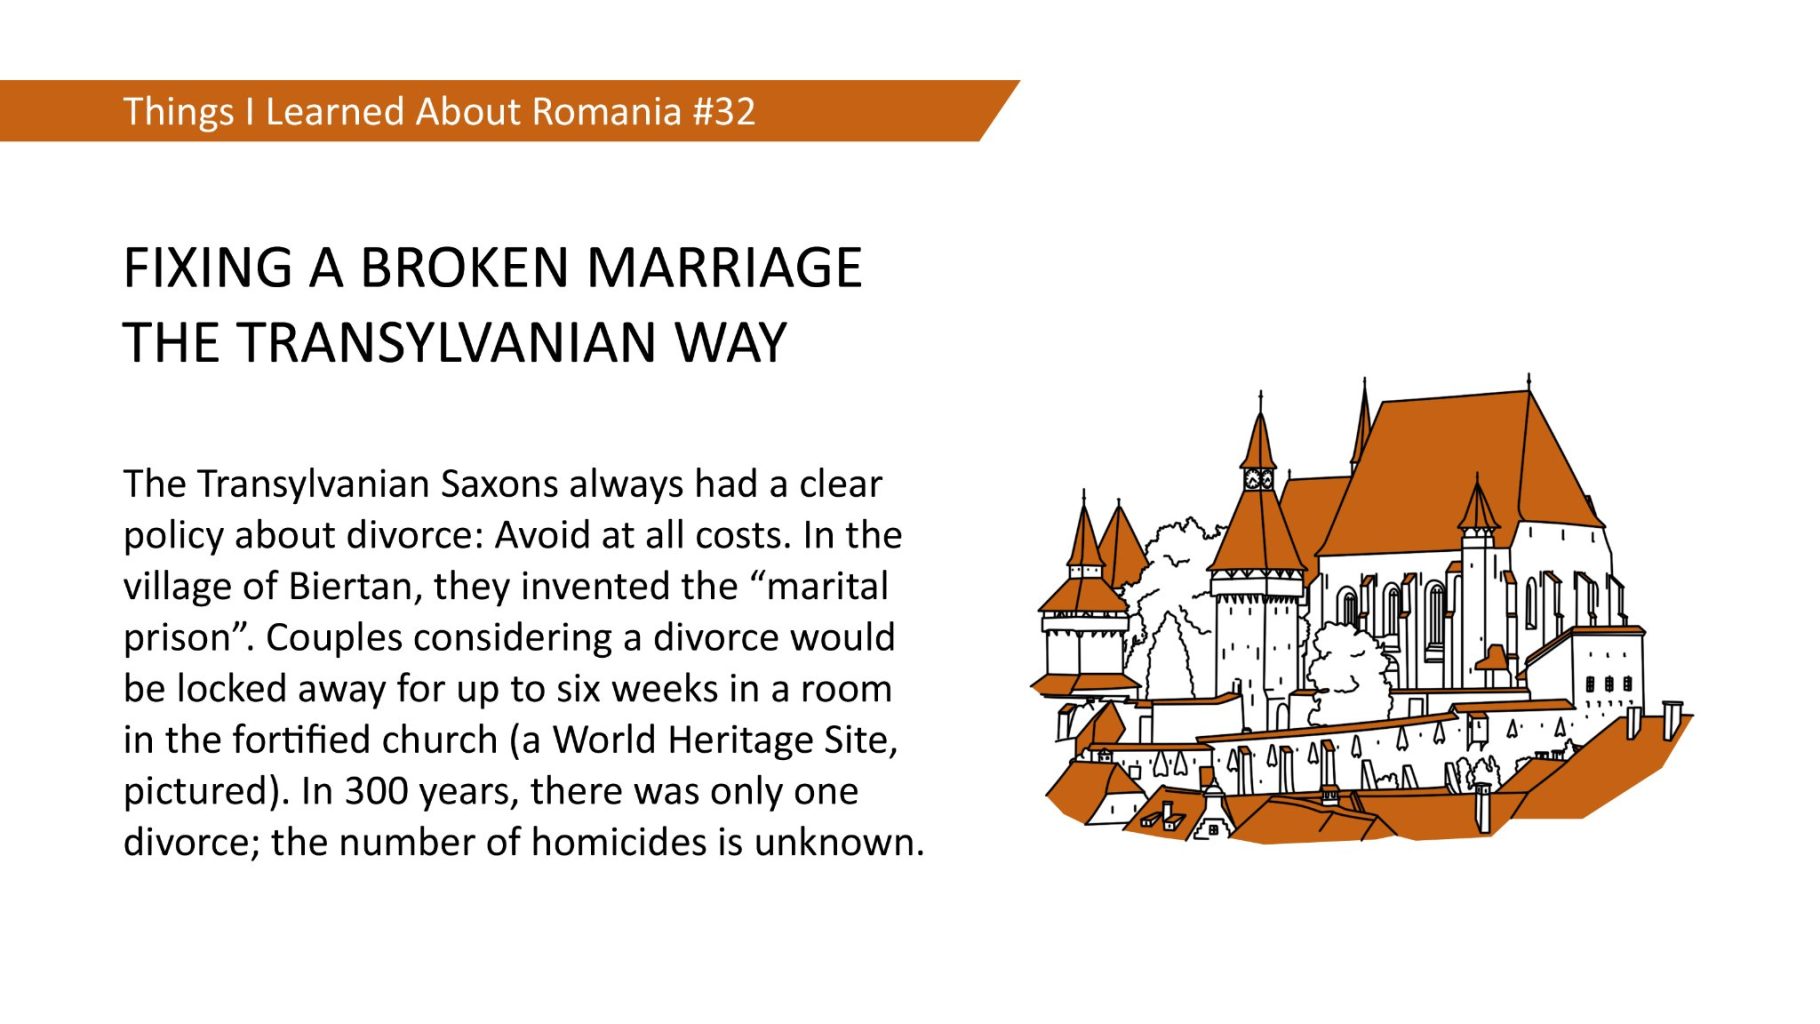 FIXING A BROKEN MARRIAGE THE TRANSYLVANIAN WAY - The Transylvanian Saxons always had a clear policy about divorce: Avoid at all costs. In the village of Biertan, they invented the "marital prison". Couples considering a divorce would be locked away for up to six weeks in a room in the fortified church (a World Heritage Site, pictured). In 300 years, there was only one divorce; the number of homicides is unknown.